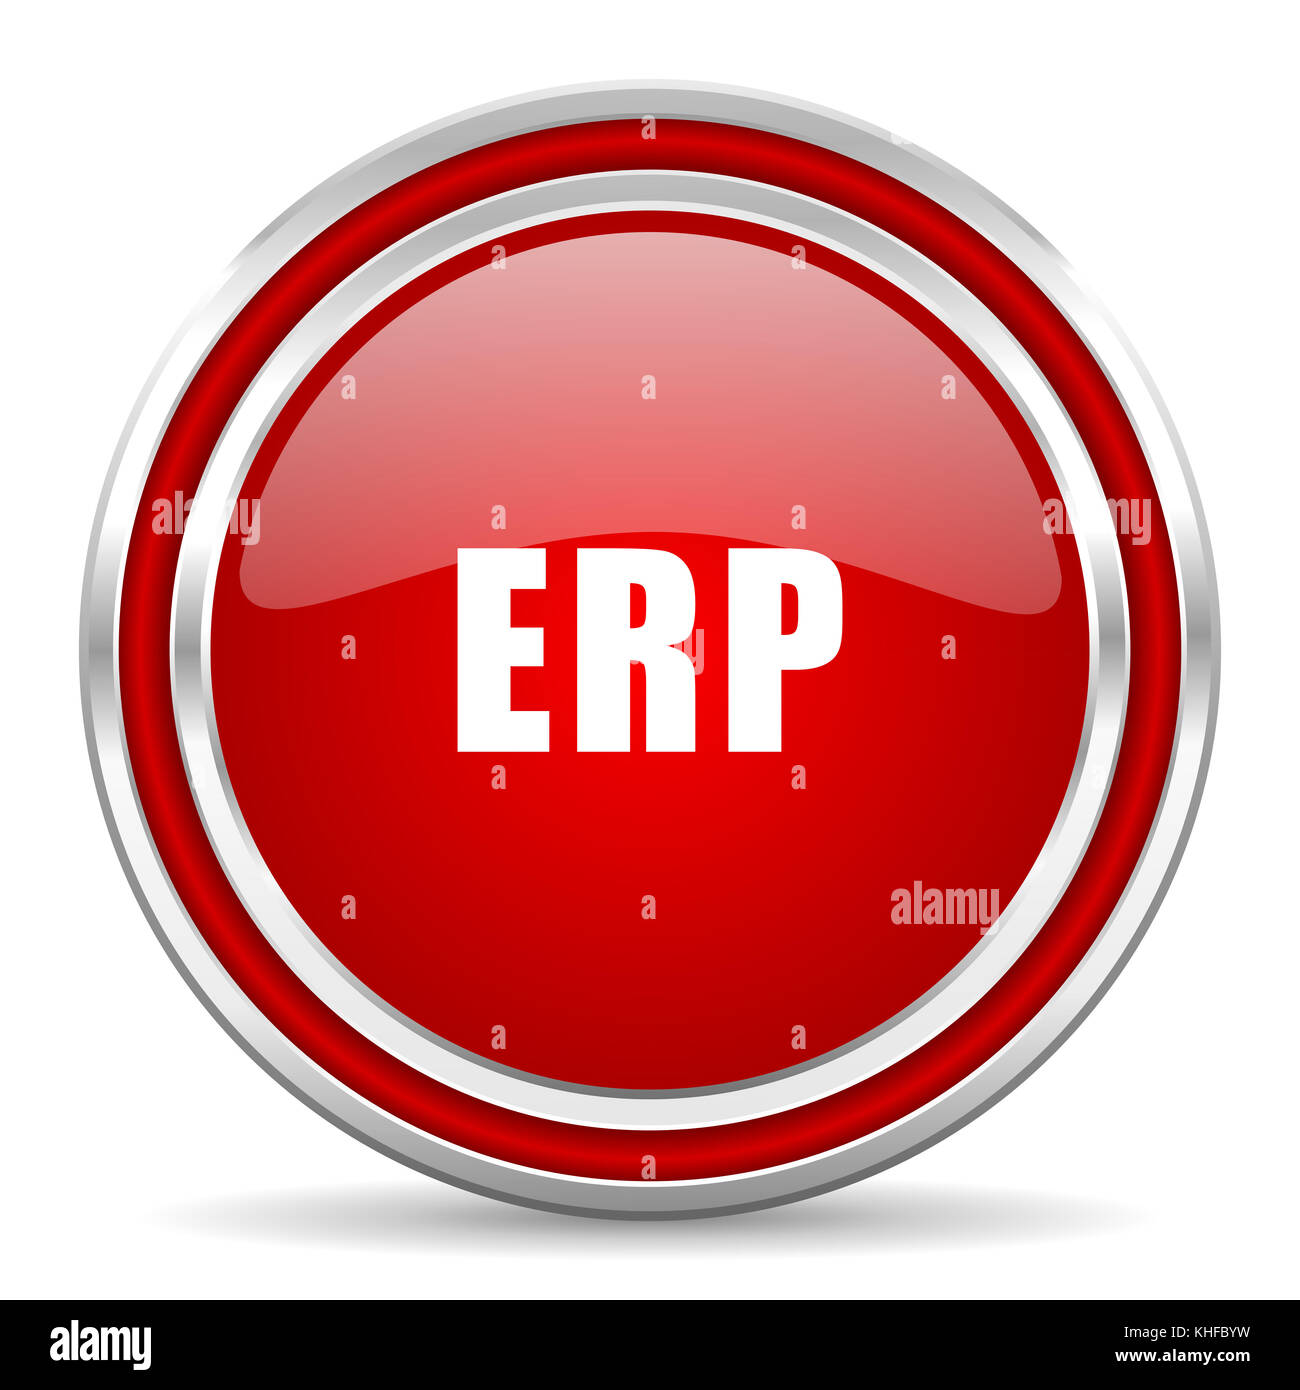 Erp red silver metallic chrome border web and mobile phone icon on white background with shadow Stock Photo